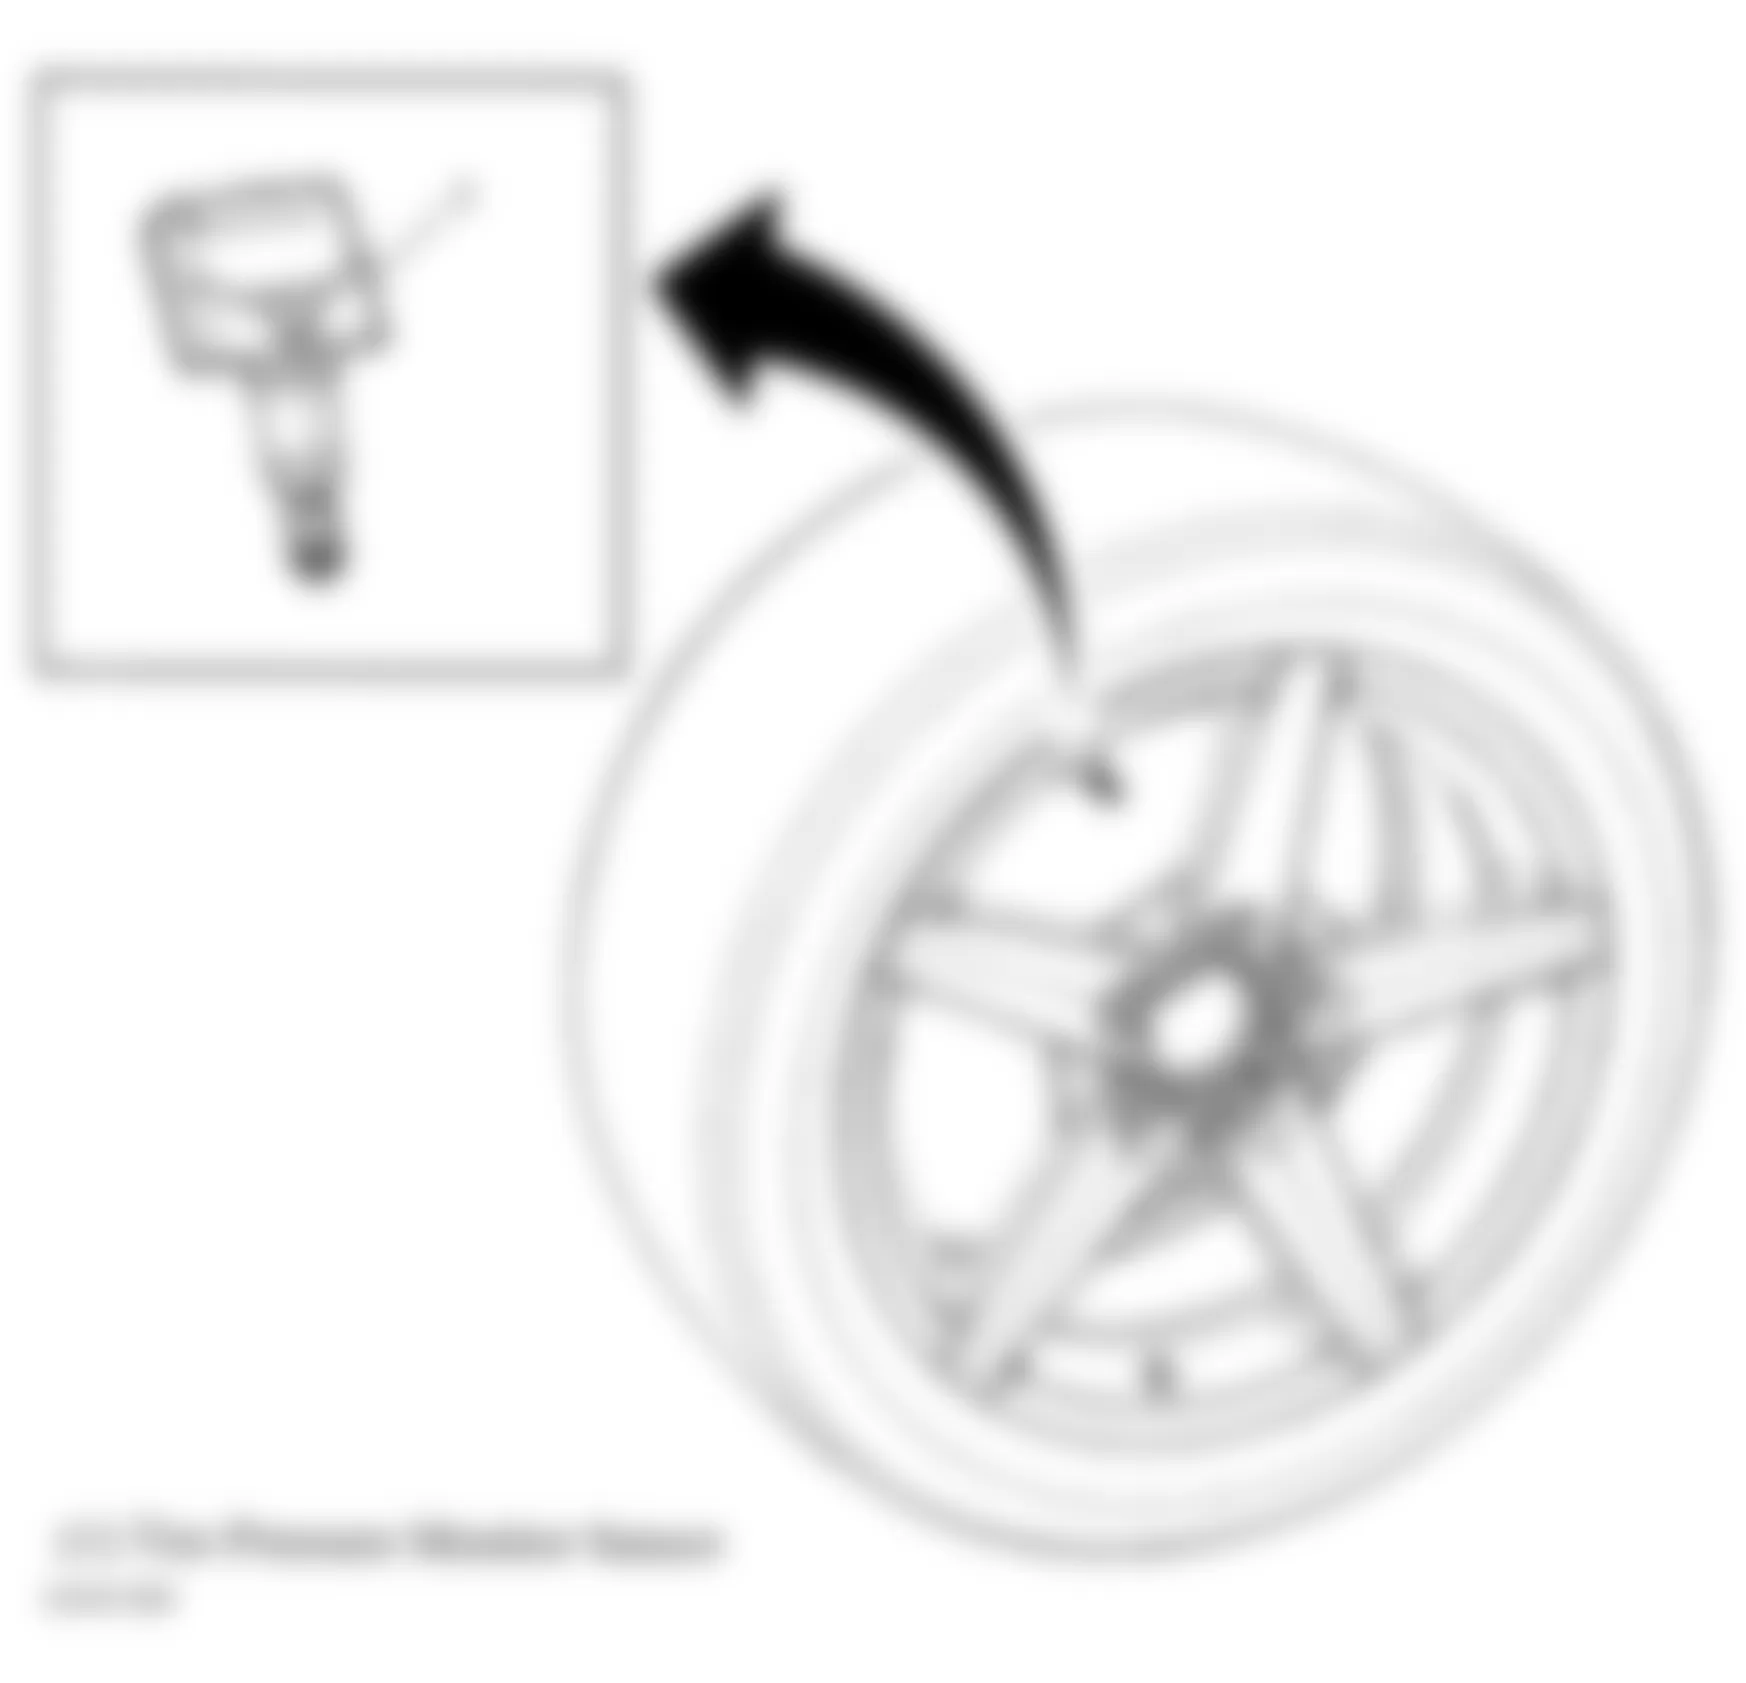 Chevrolet Impala LT 2009 - Component Locations -  Wheel Assembly